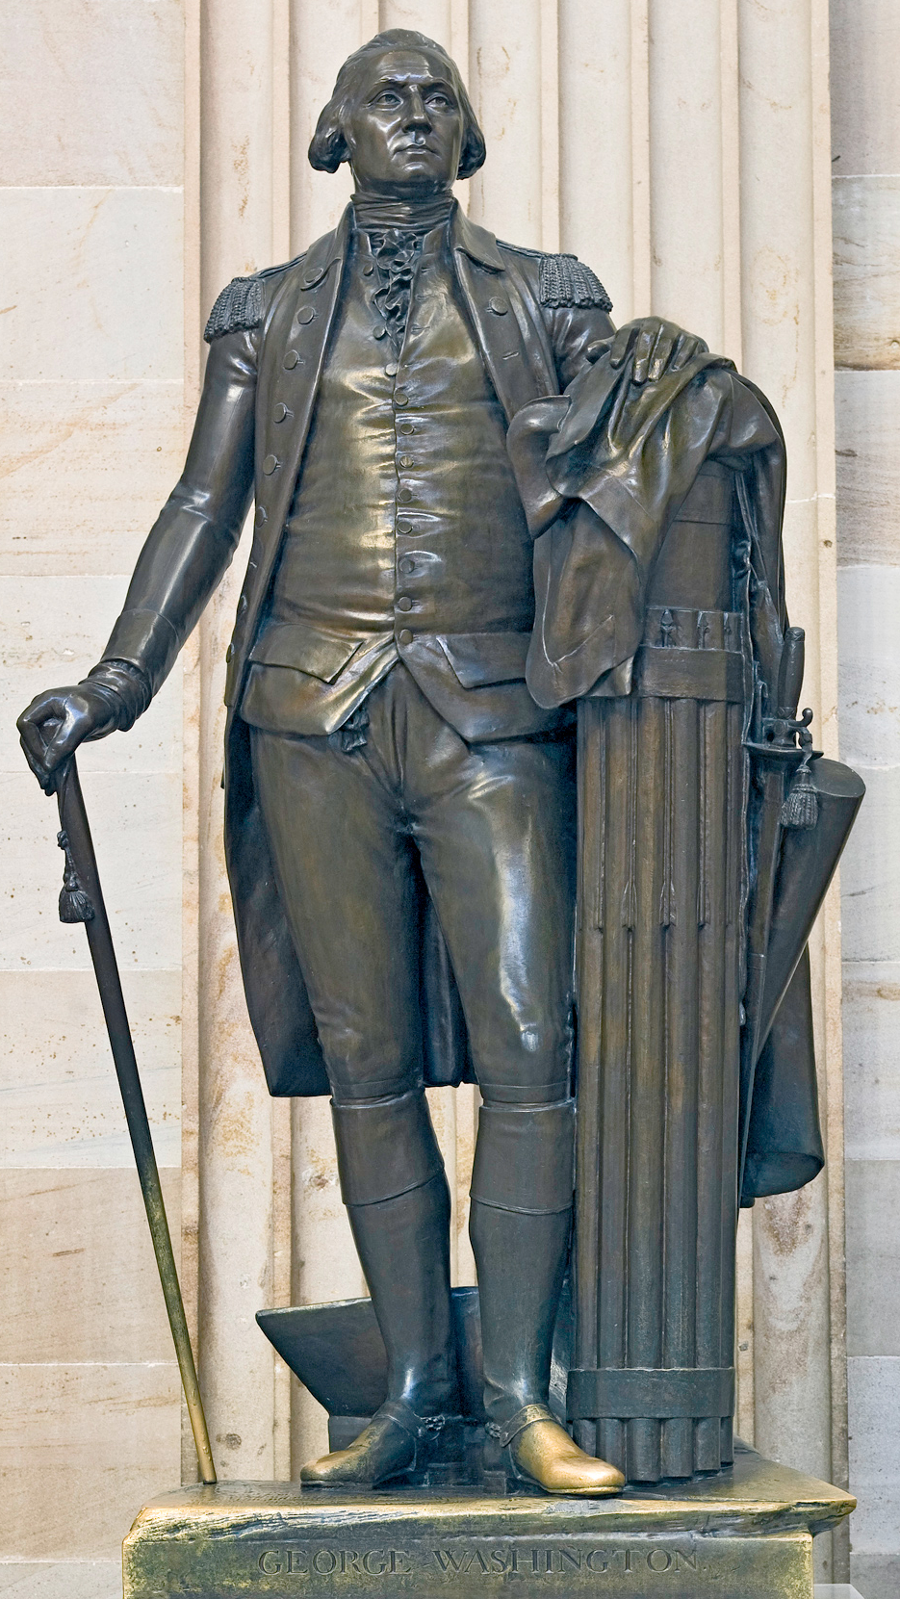 in 1934, Virginia contributed this copy of the 
Jean Antoine Houdon statue to the National Statuary Hall Collection in the US Capitol